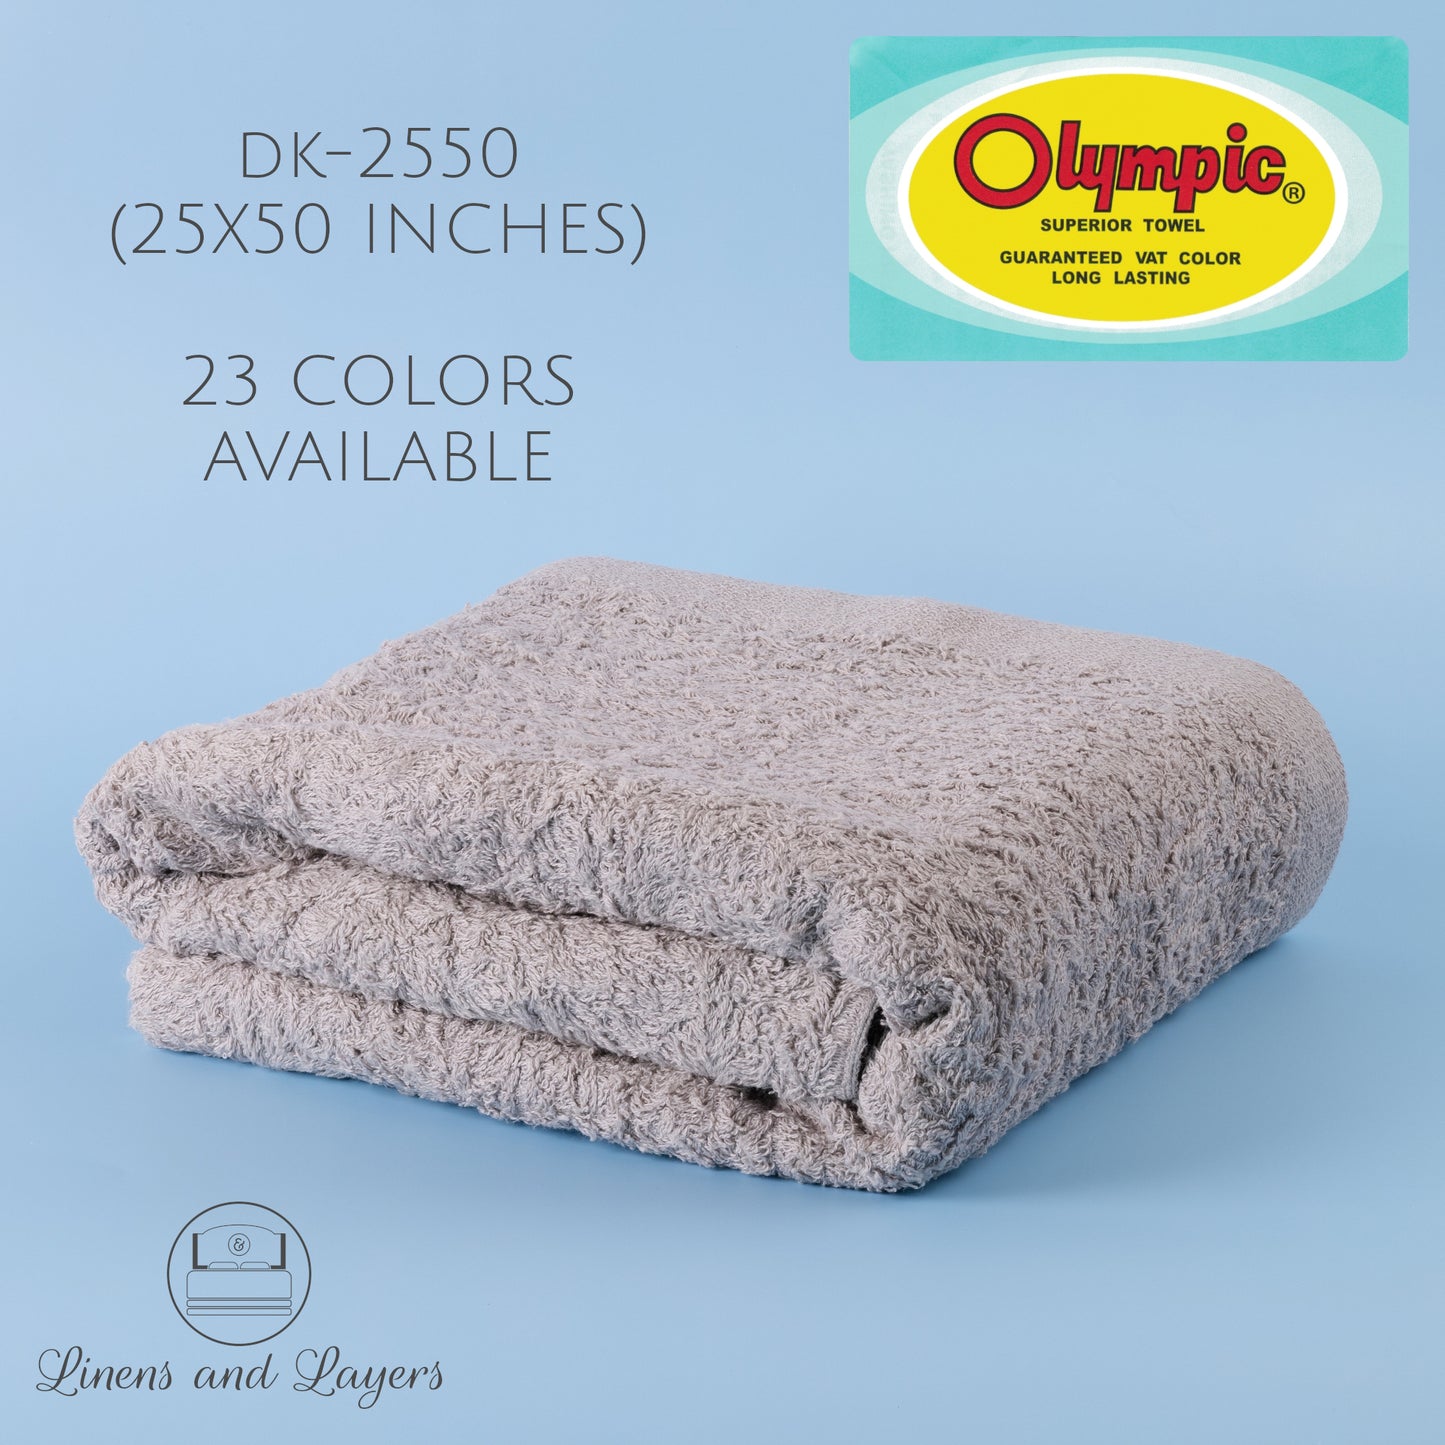 Olympic Bath Towel  (470 GSM) - DK-2550 Terrycloth - 25x50 inches